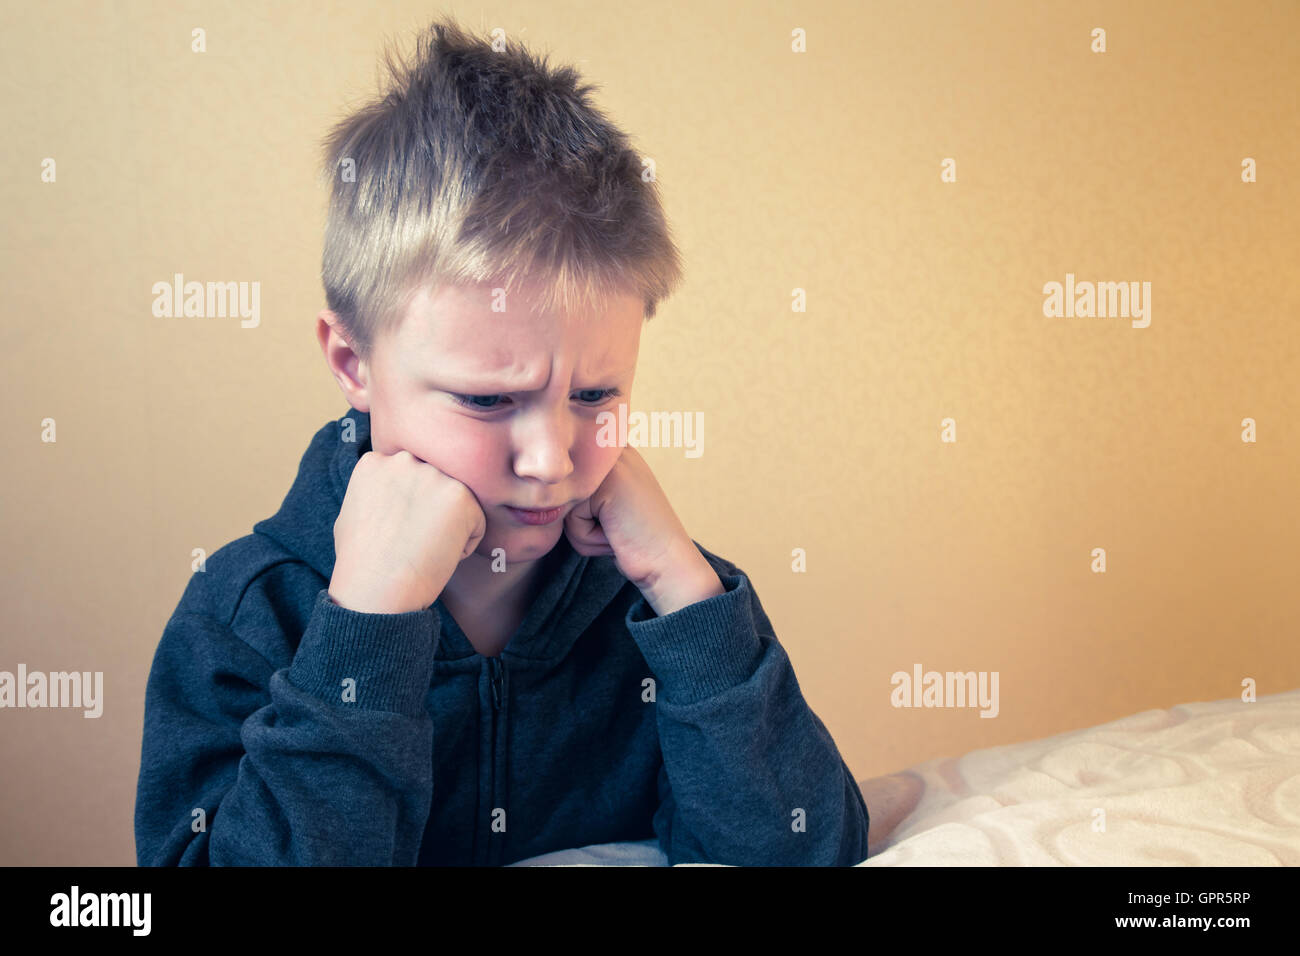 Sad upset tired worried unhappy kid (boy, teen) close up portrait with copy space Stock Photo